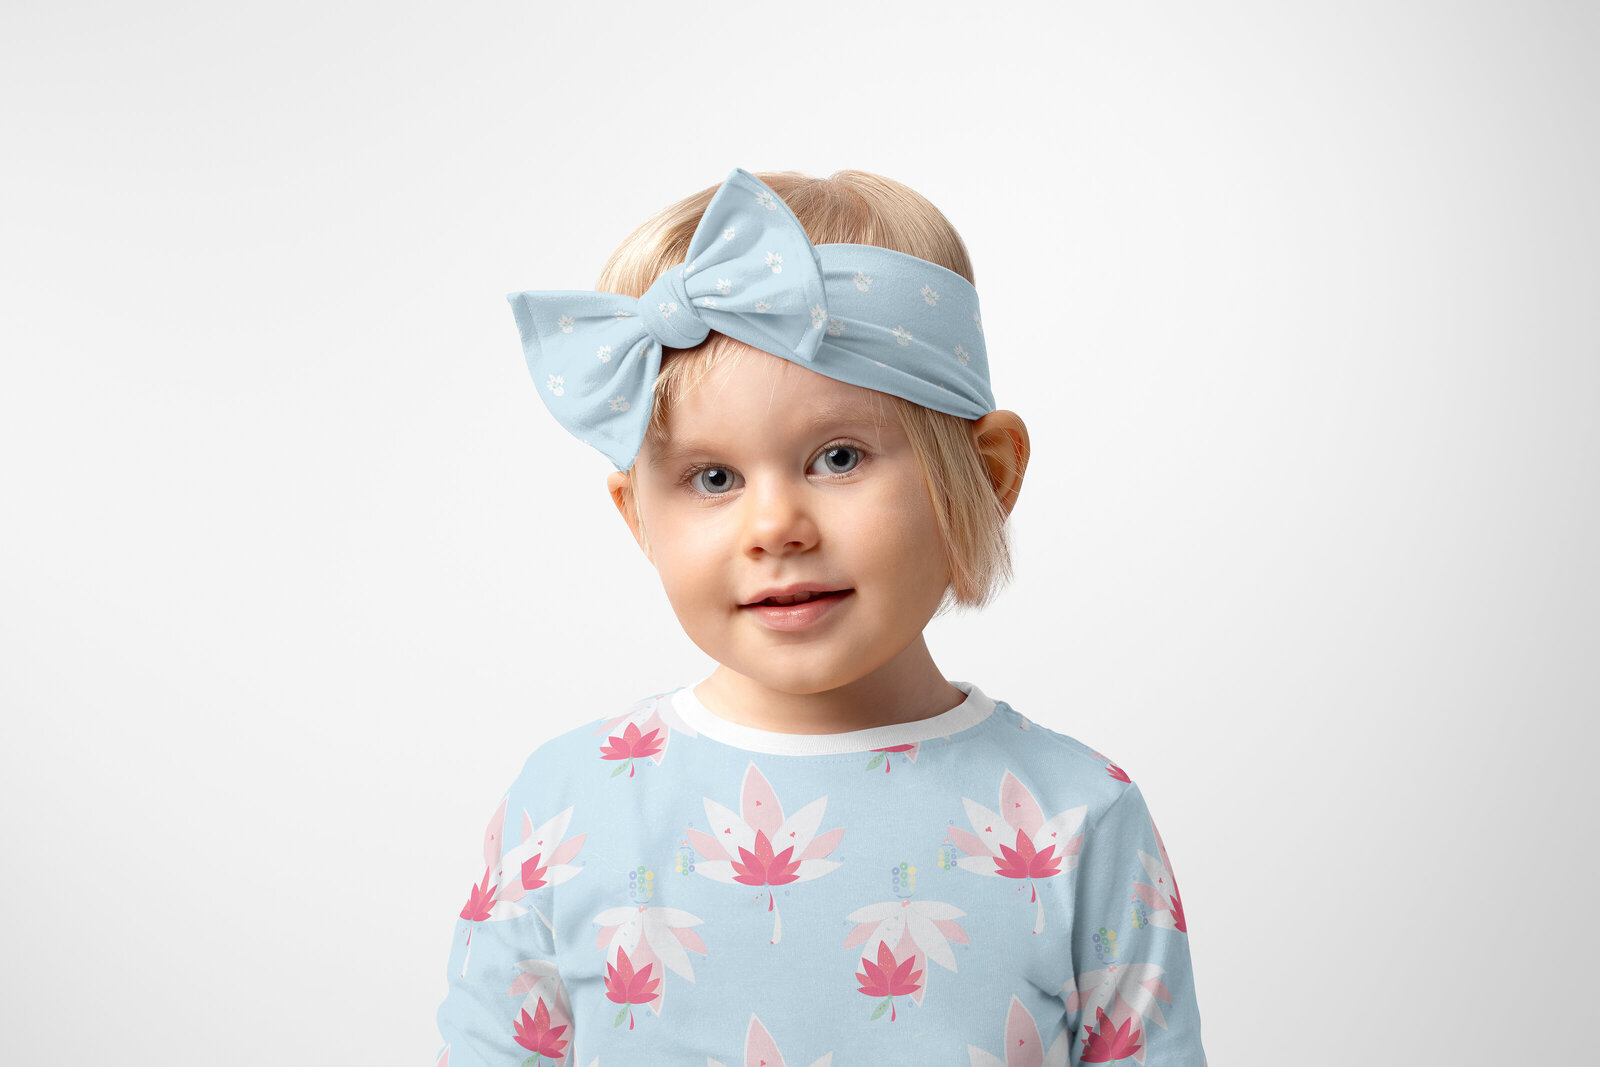 Blue, white, and pink patterned children's headband and shirt